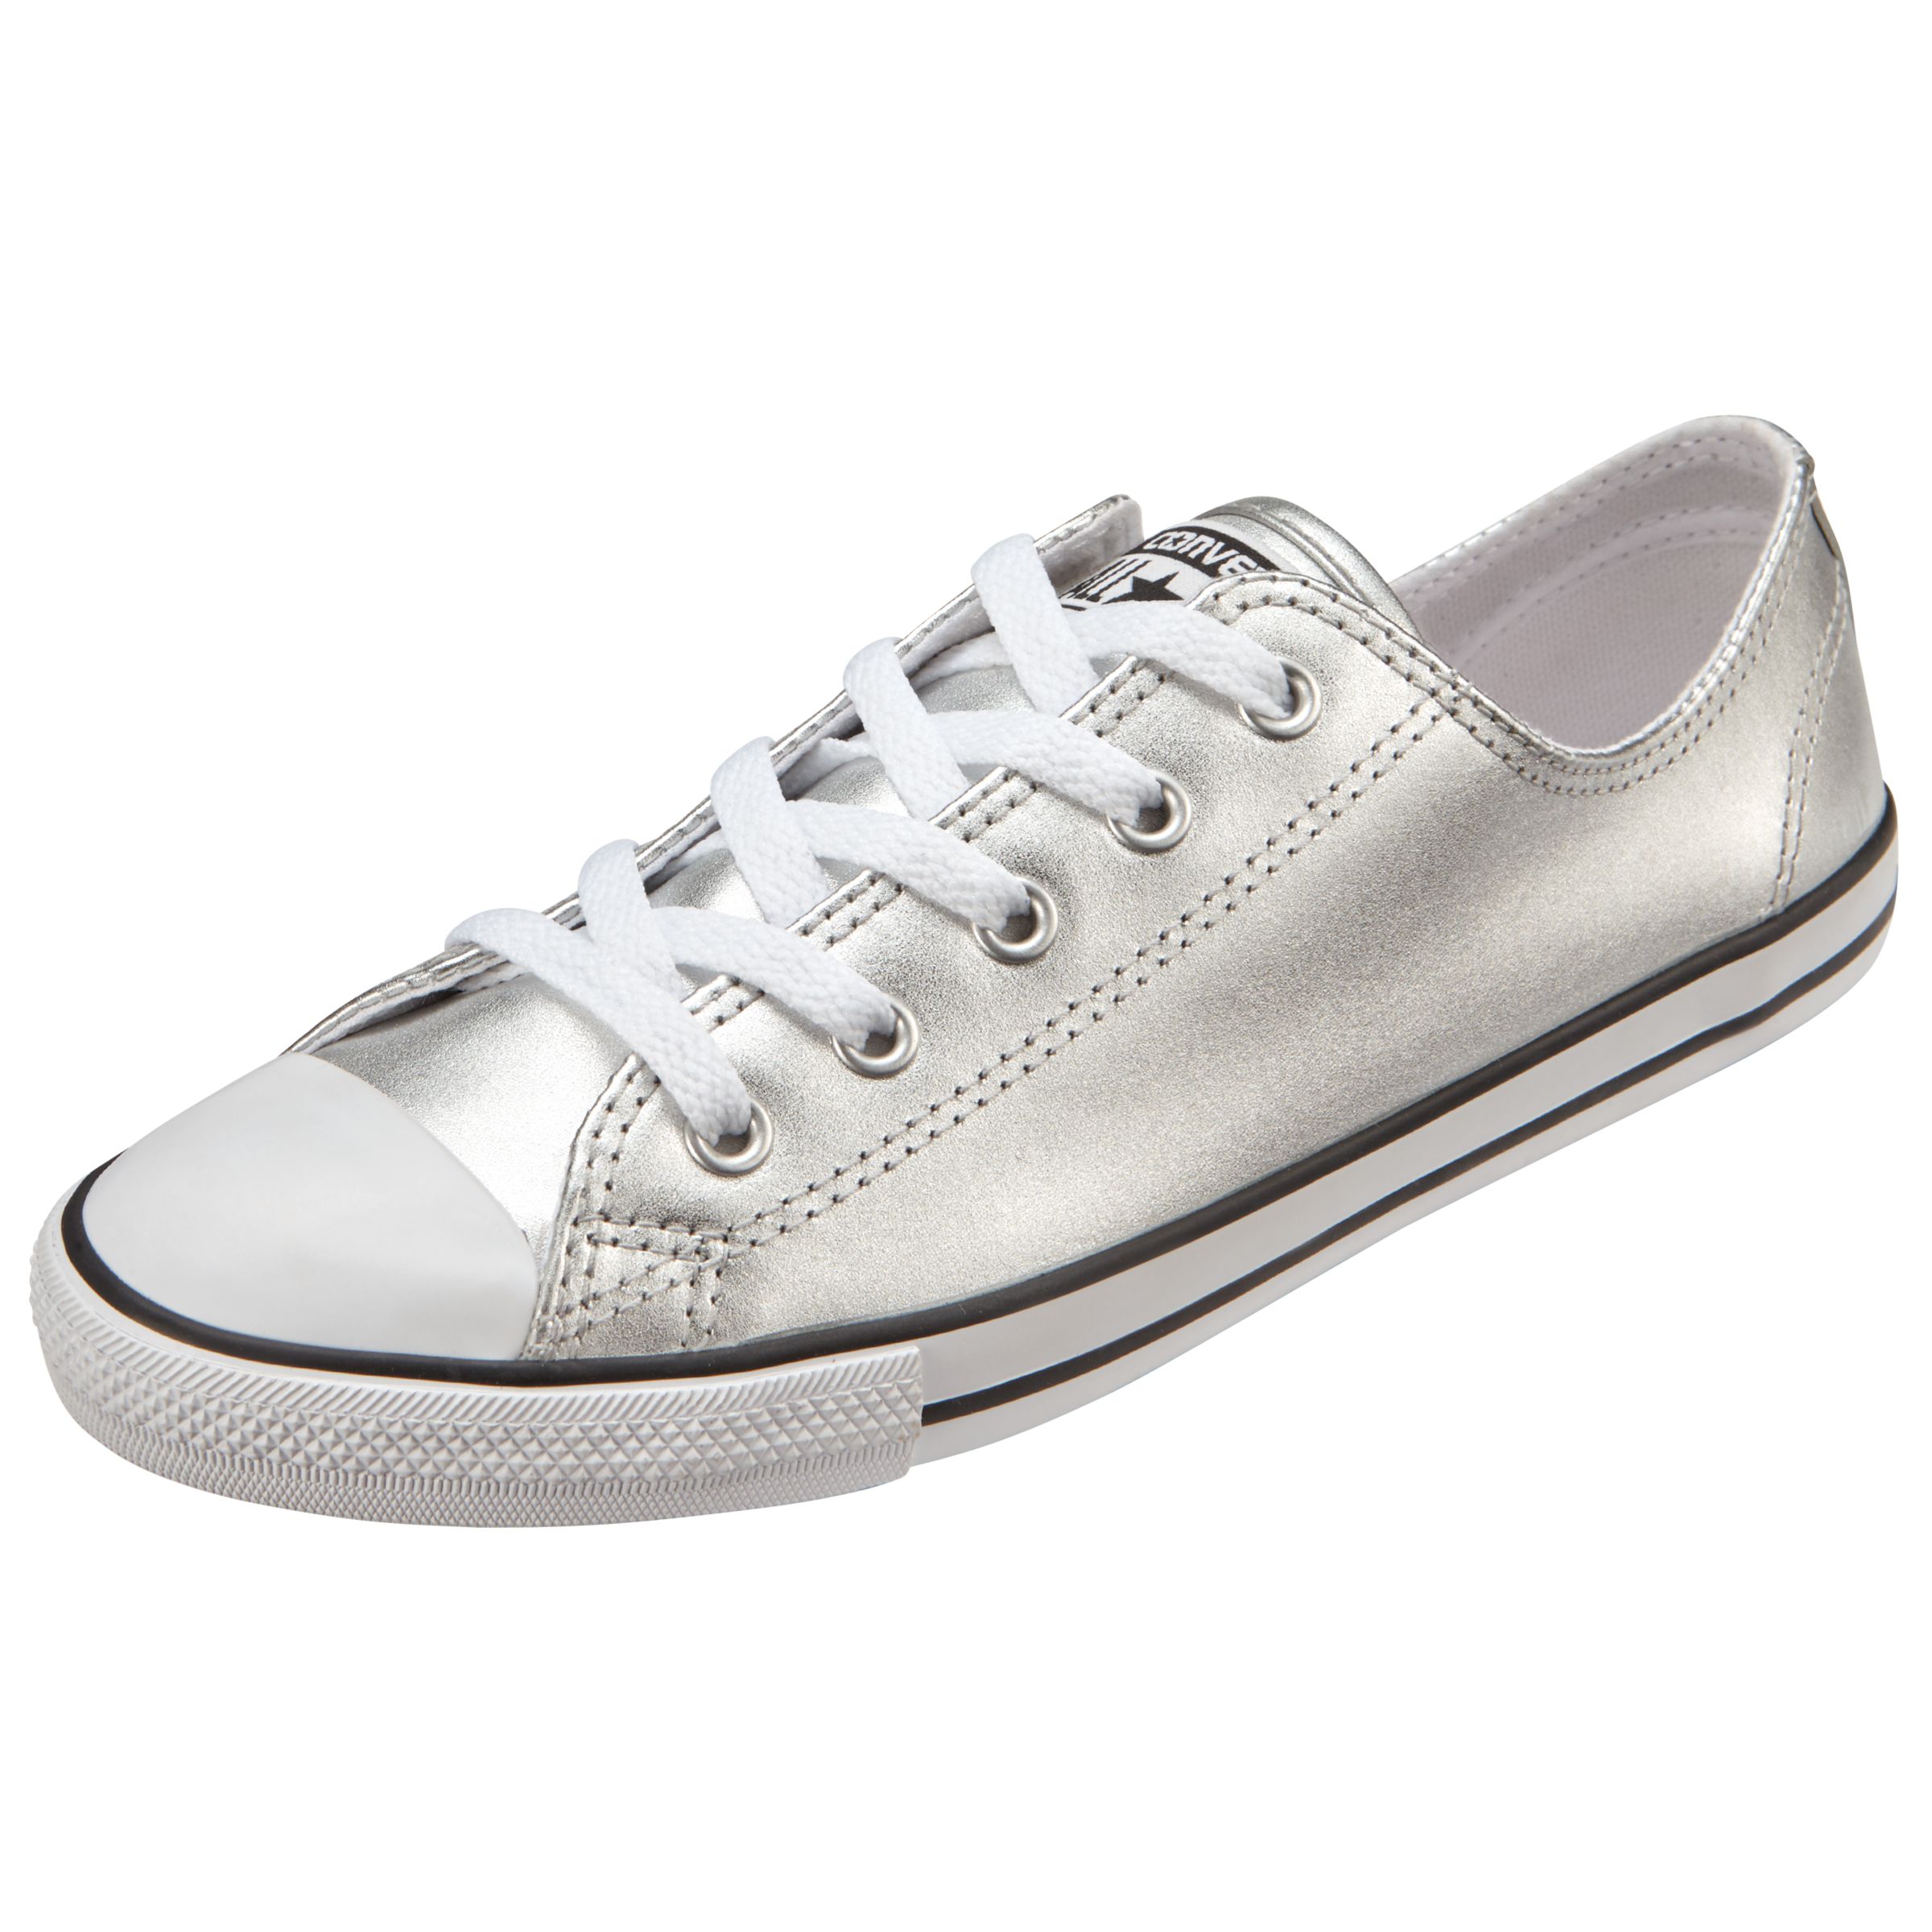 converse dainty silver - 63% remise 